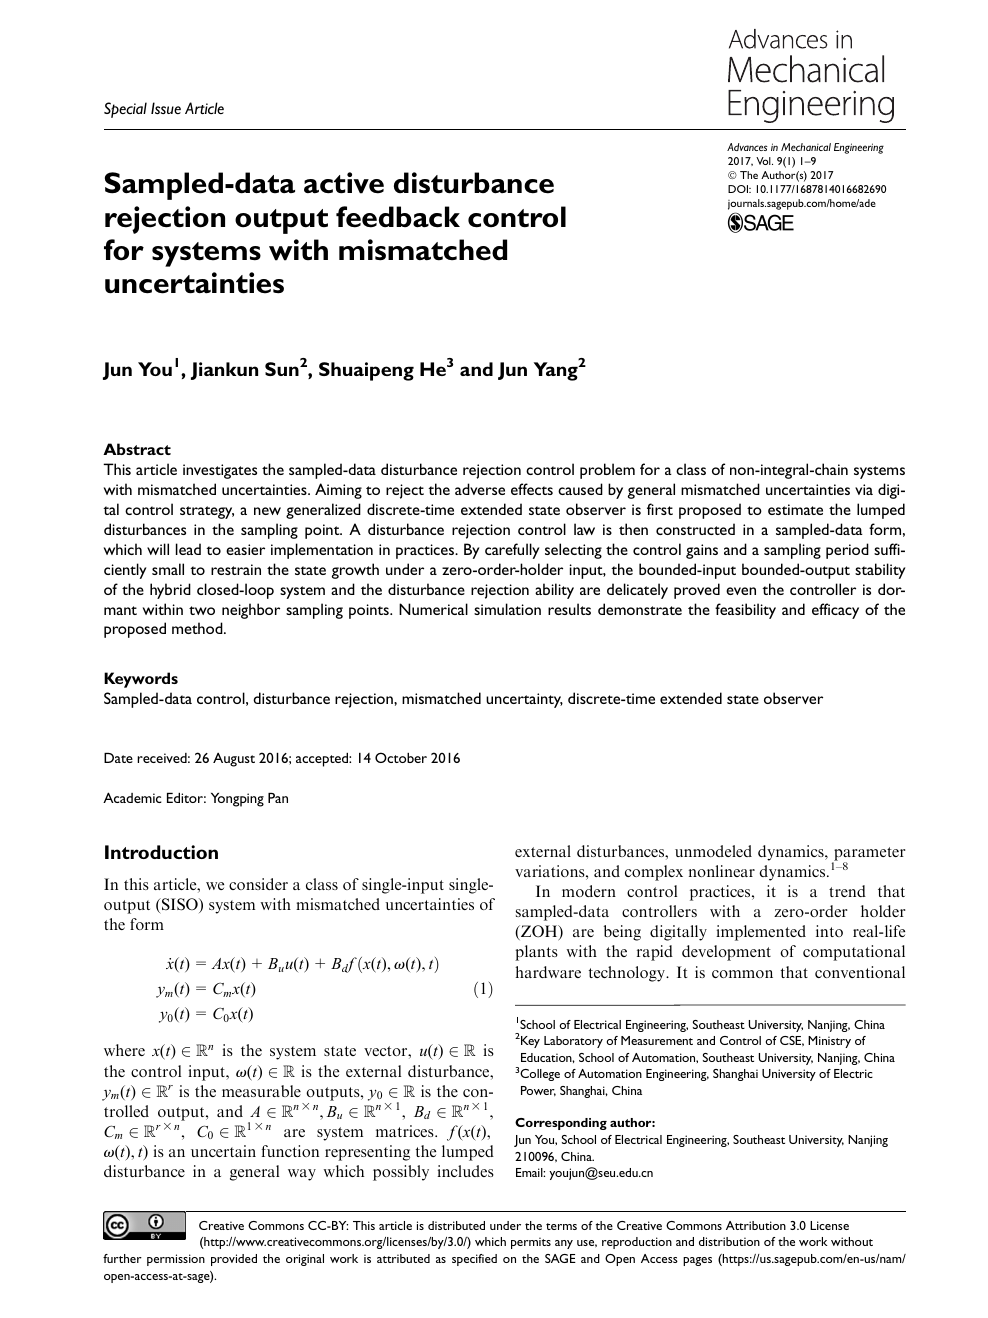 Sampled Data Active Disturbance Rejection Output Feedback Control For Systems With Mismatched Uncertainties Topic Of Research Paper In Mechanical Engineering Download Scholarly Article Pdf And Read For Free On Cyberleninka Open Science